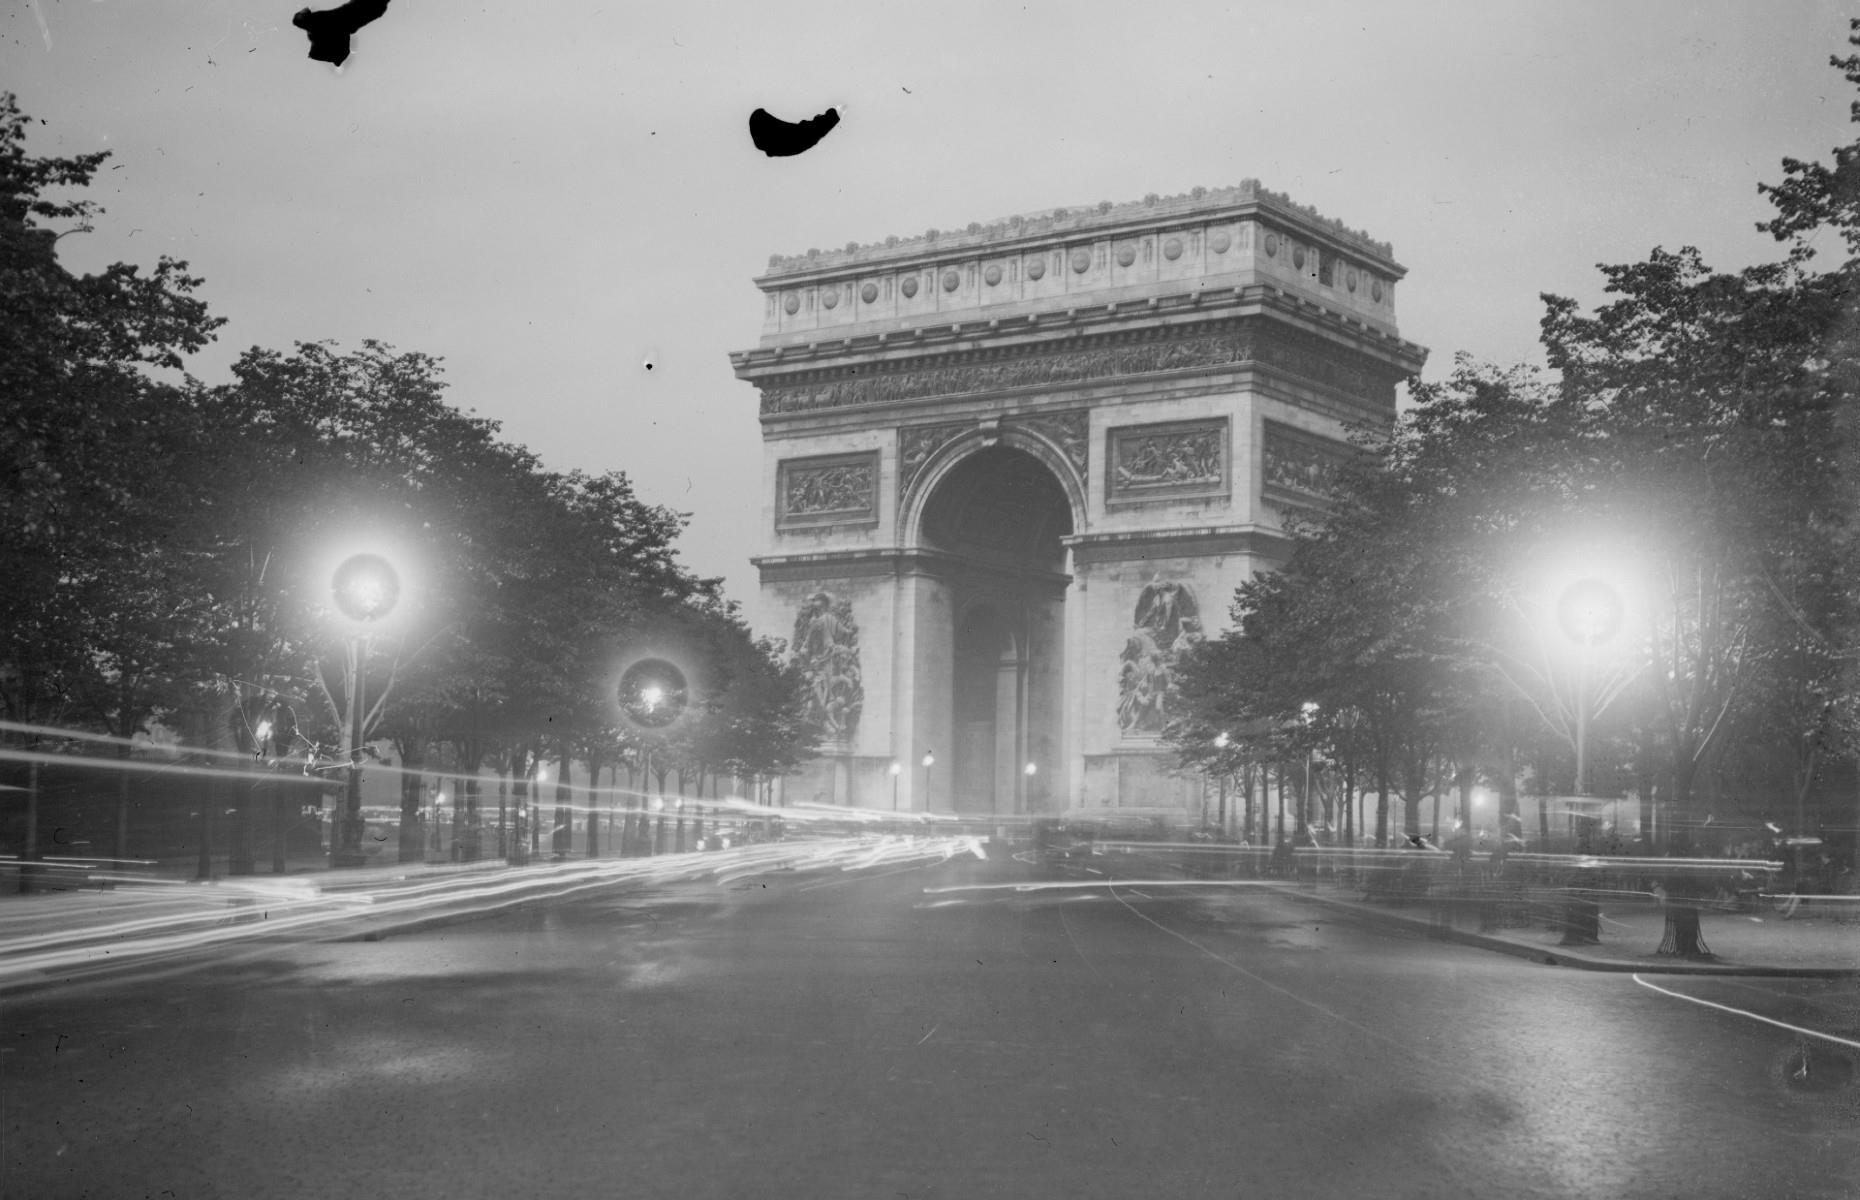 <p>With its ornate, Neoclassical and towering 164-foot (50m) frame, it’s hard not to be impressed by the Arc de Triomphe. It’s not surprising, then, that the lavish landmark took a whopping 30 years to build. Commissioned by Napoleon I in 1806, the arch stands at the center of the aptly-named Place de l’Étoile, or Star Square, whose streets radiate outwards in a star-like formation. Pictured here in 1929, it’s surrounded by electric street lights – Paris was the first city in the world to introduce this innovation in 1878.</p>